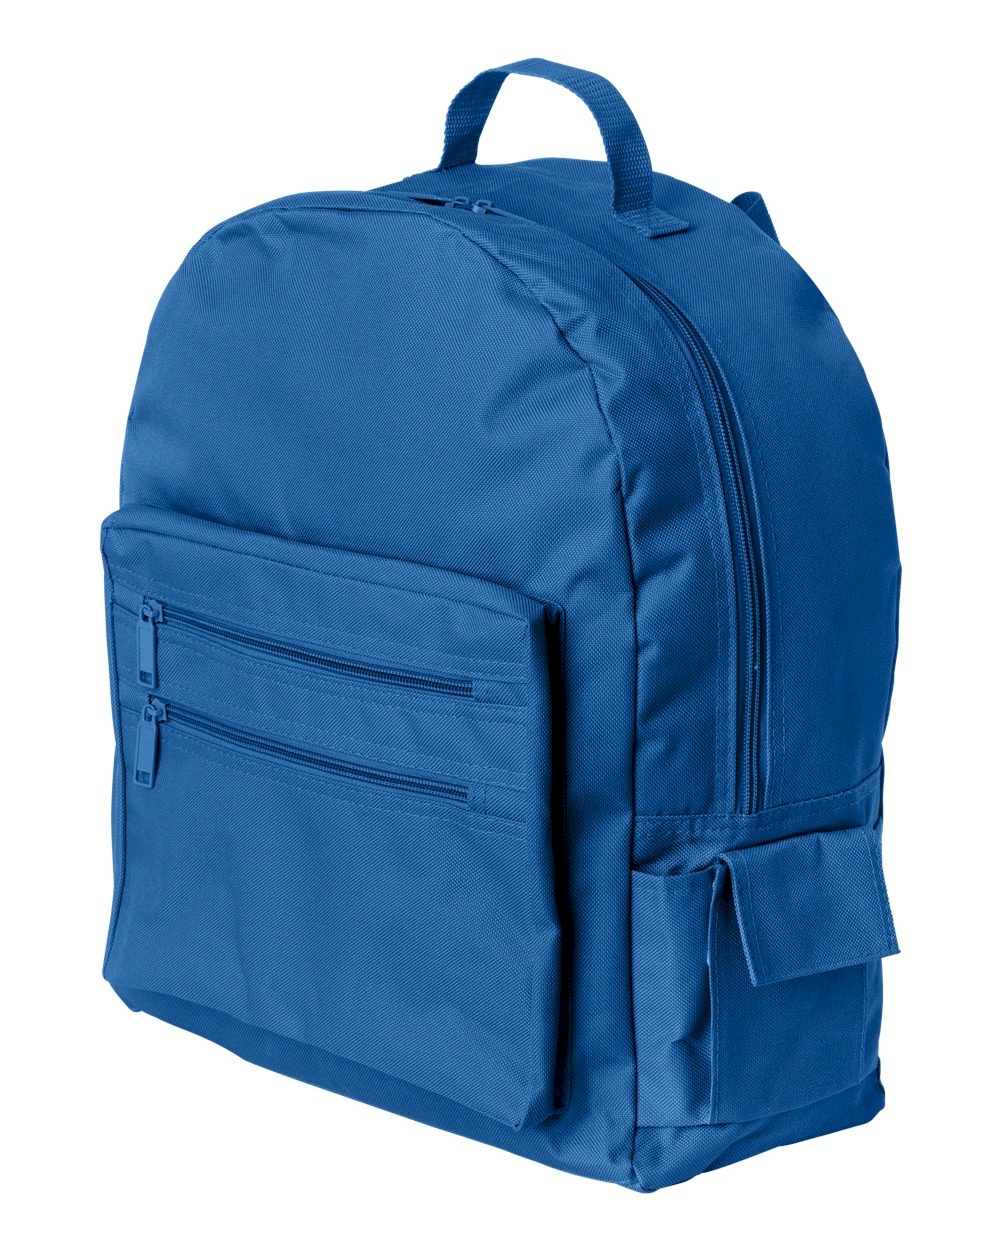 Eco-Friendly 16" Backpack Embroidery Blanks - ROYAL